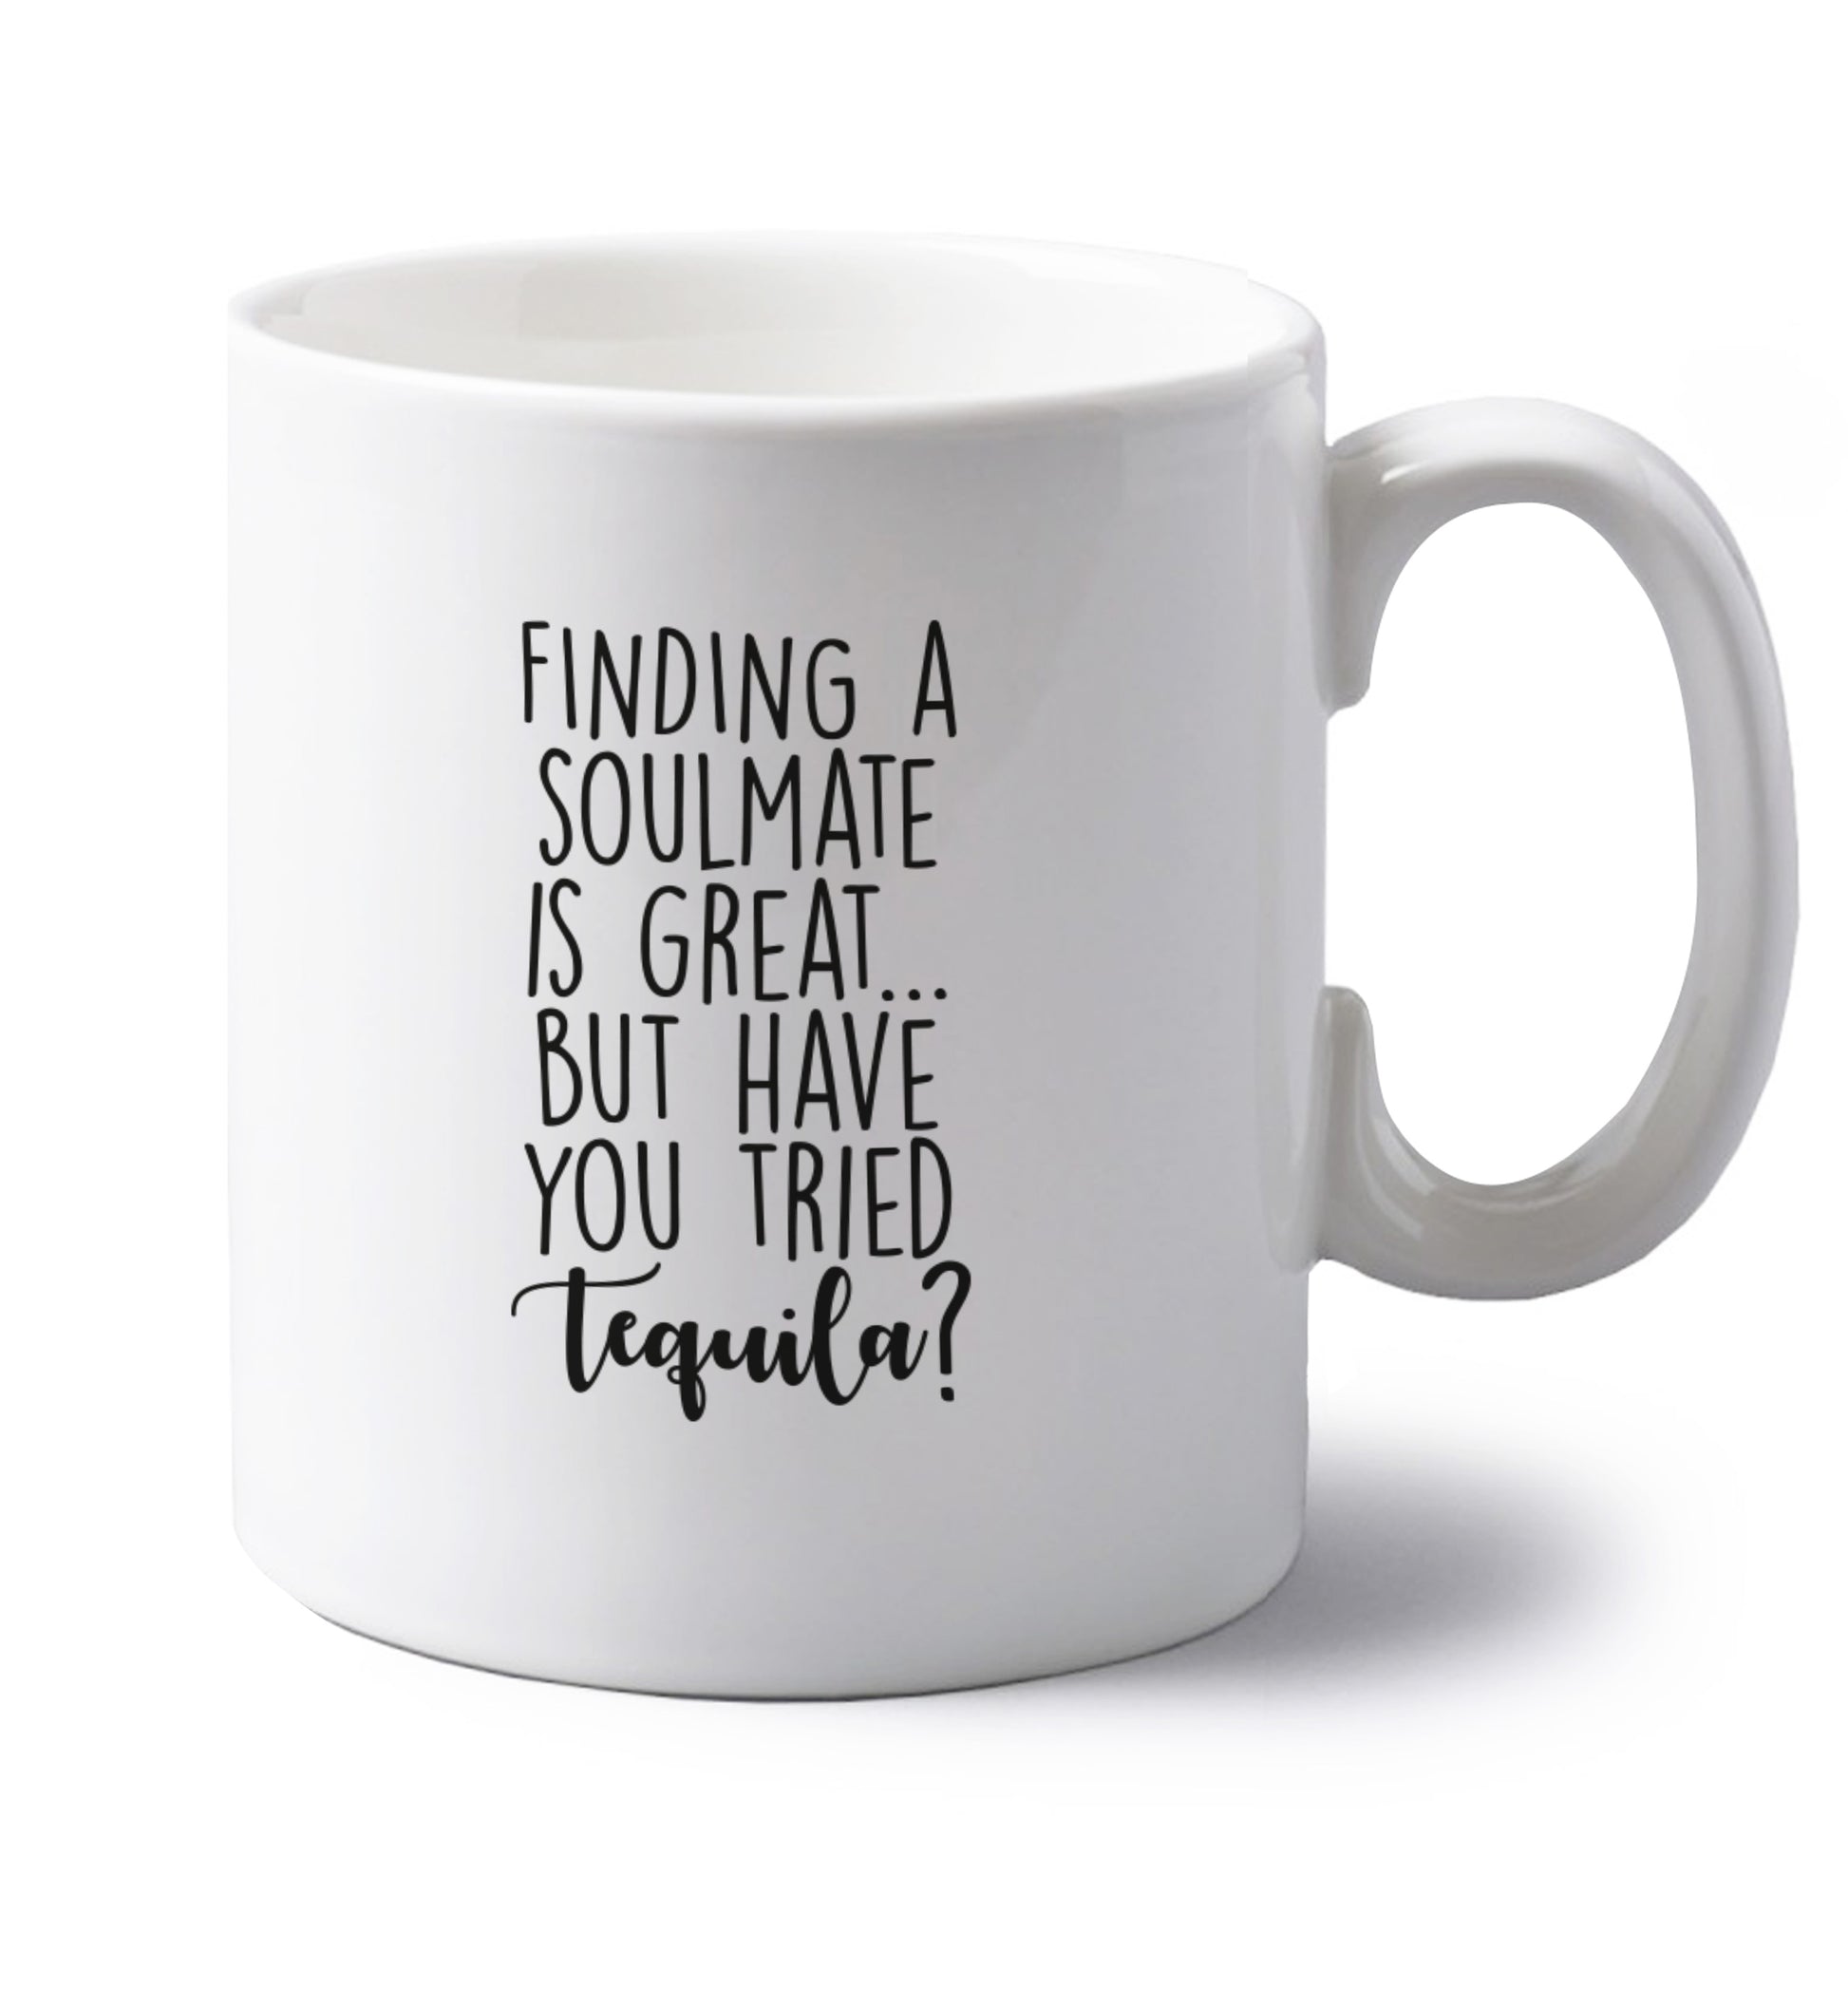 Finding a soulmate is great but have you tried tequila? left handed white ceramic mug 